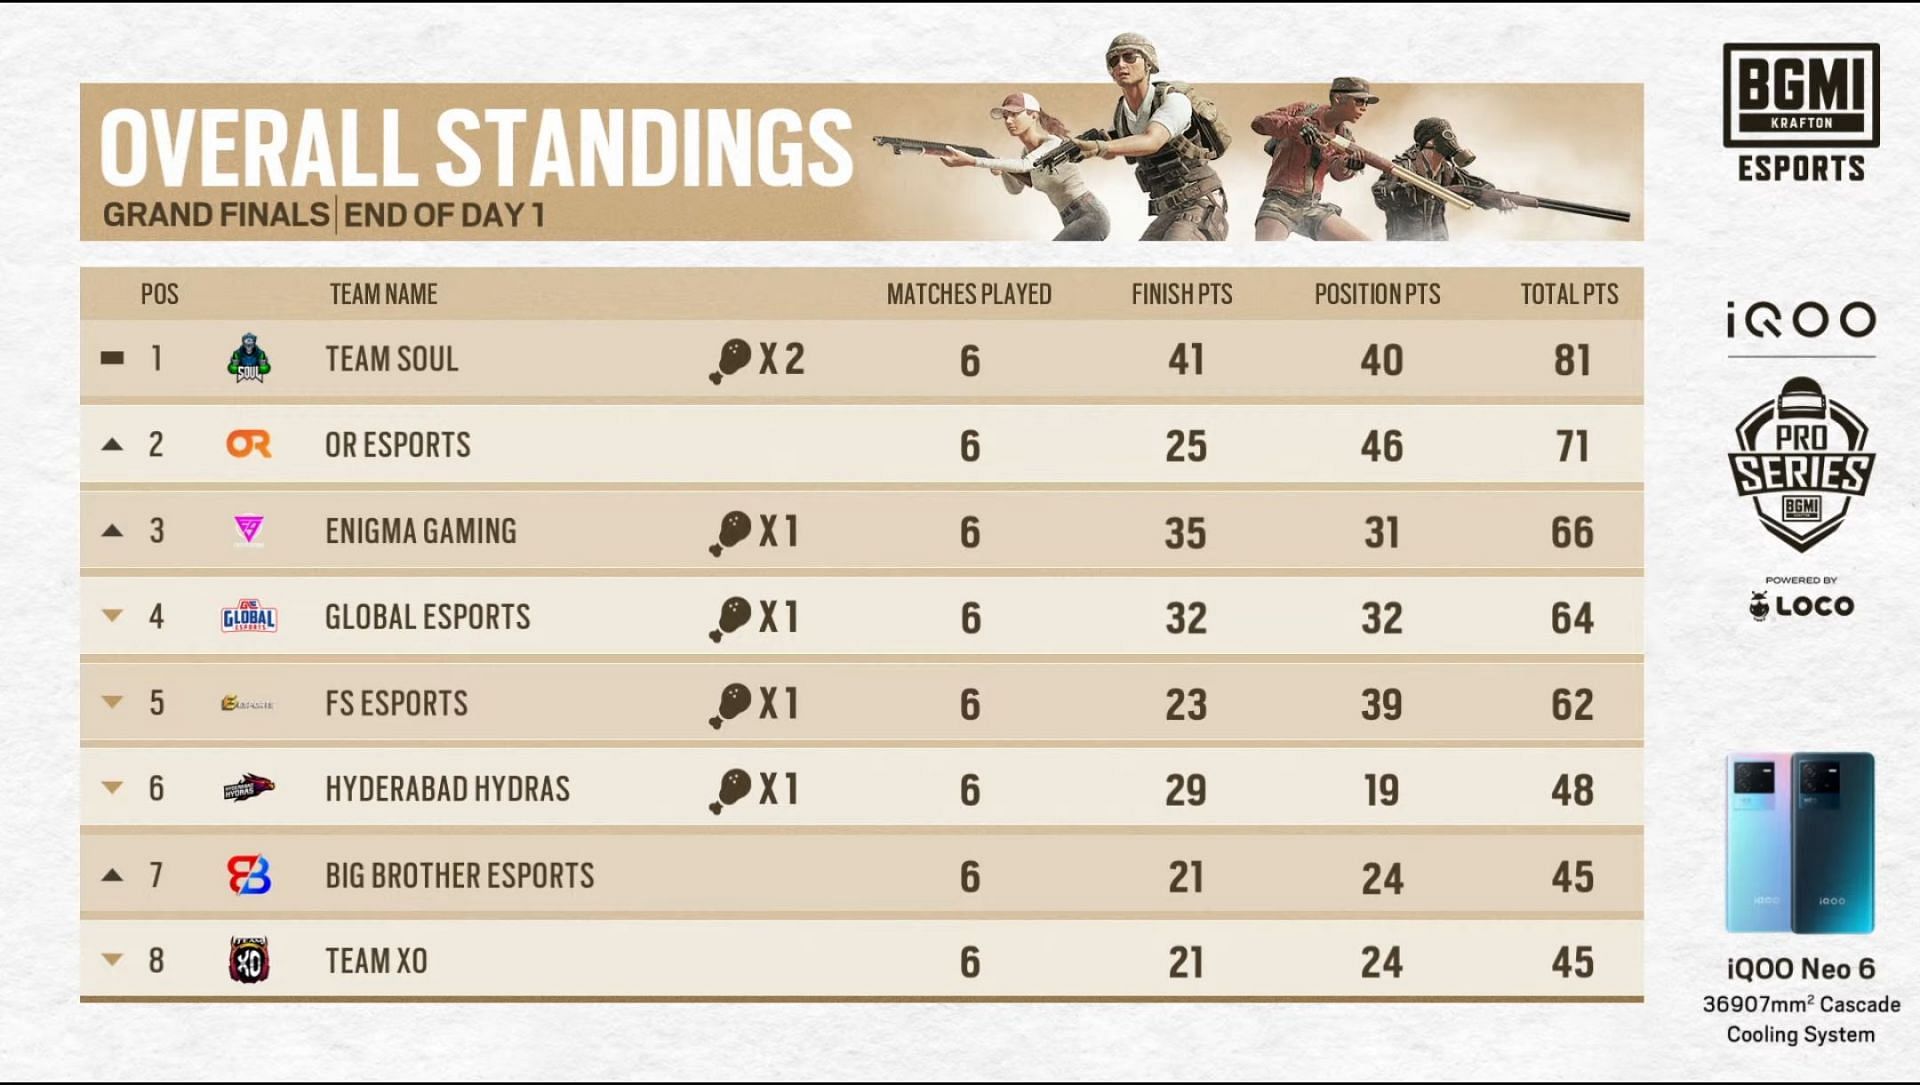 OR Esports placed second after BMPS Finals day 1 (Image via BGMI)